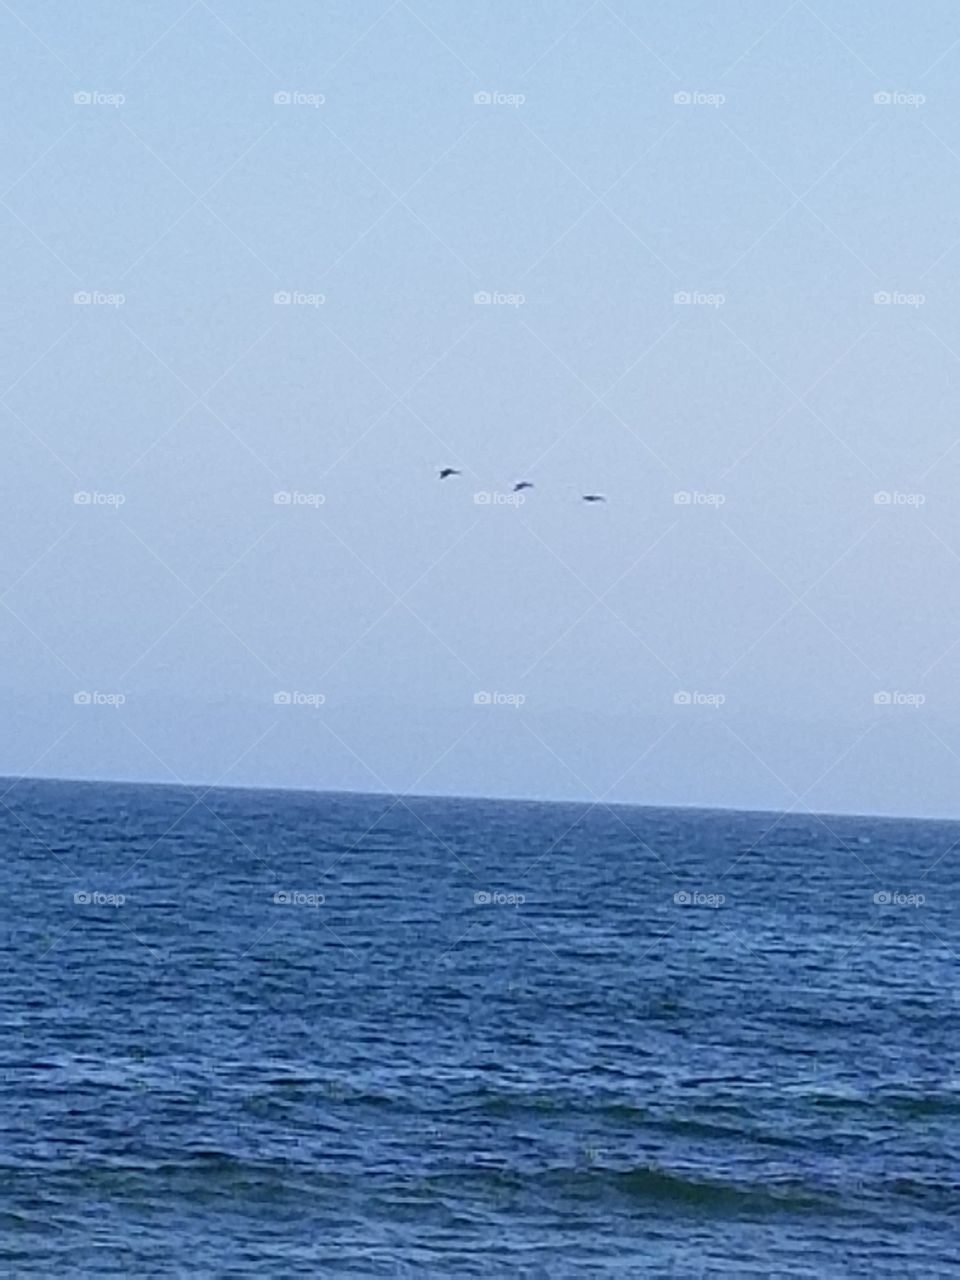 Bird formation over the sea.